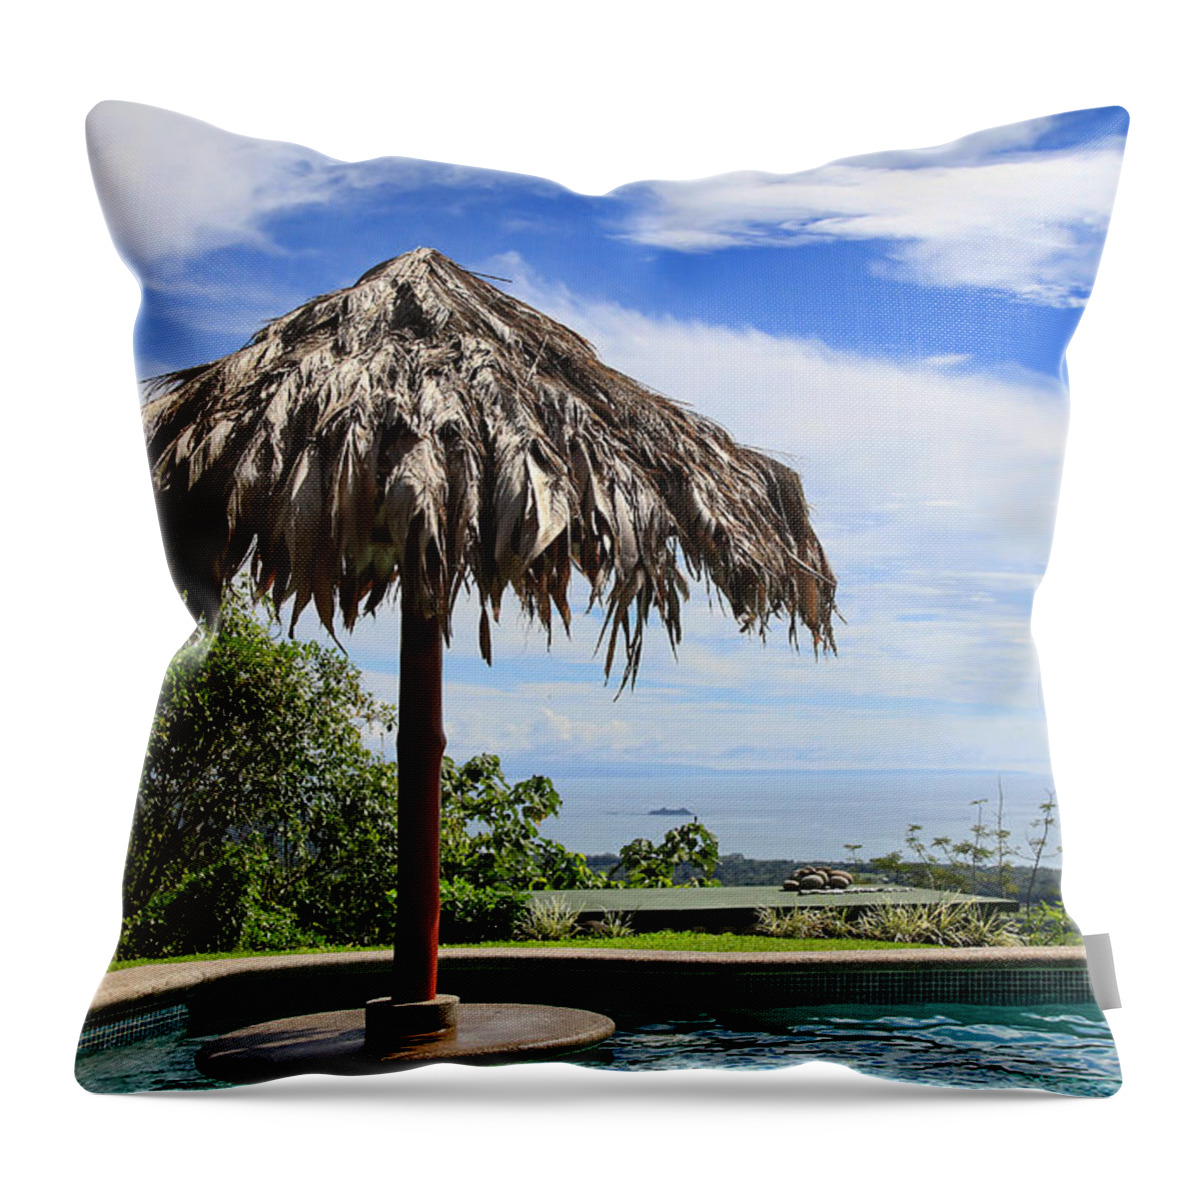 Landscape Throw Pillow featuring the photograph Million Dollars View by Teresa Zieba